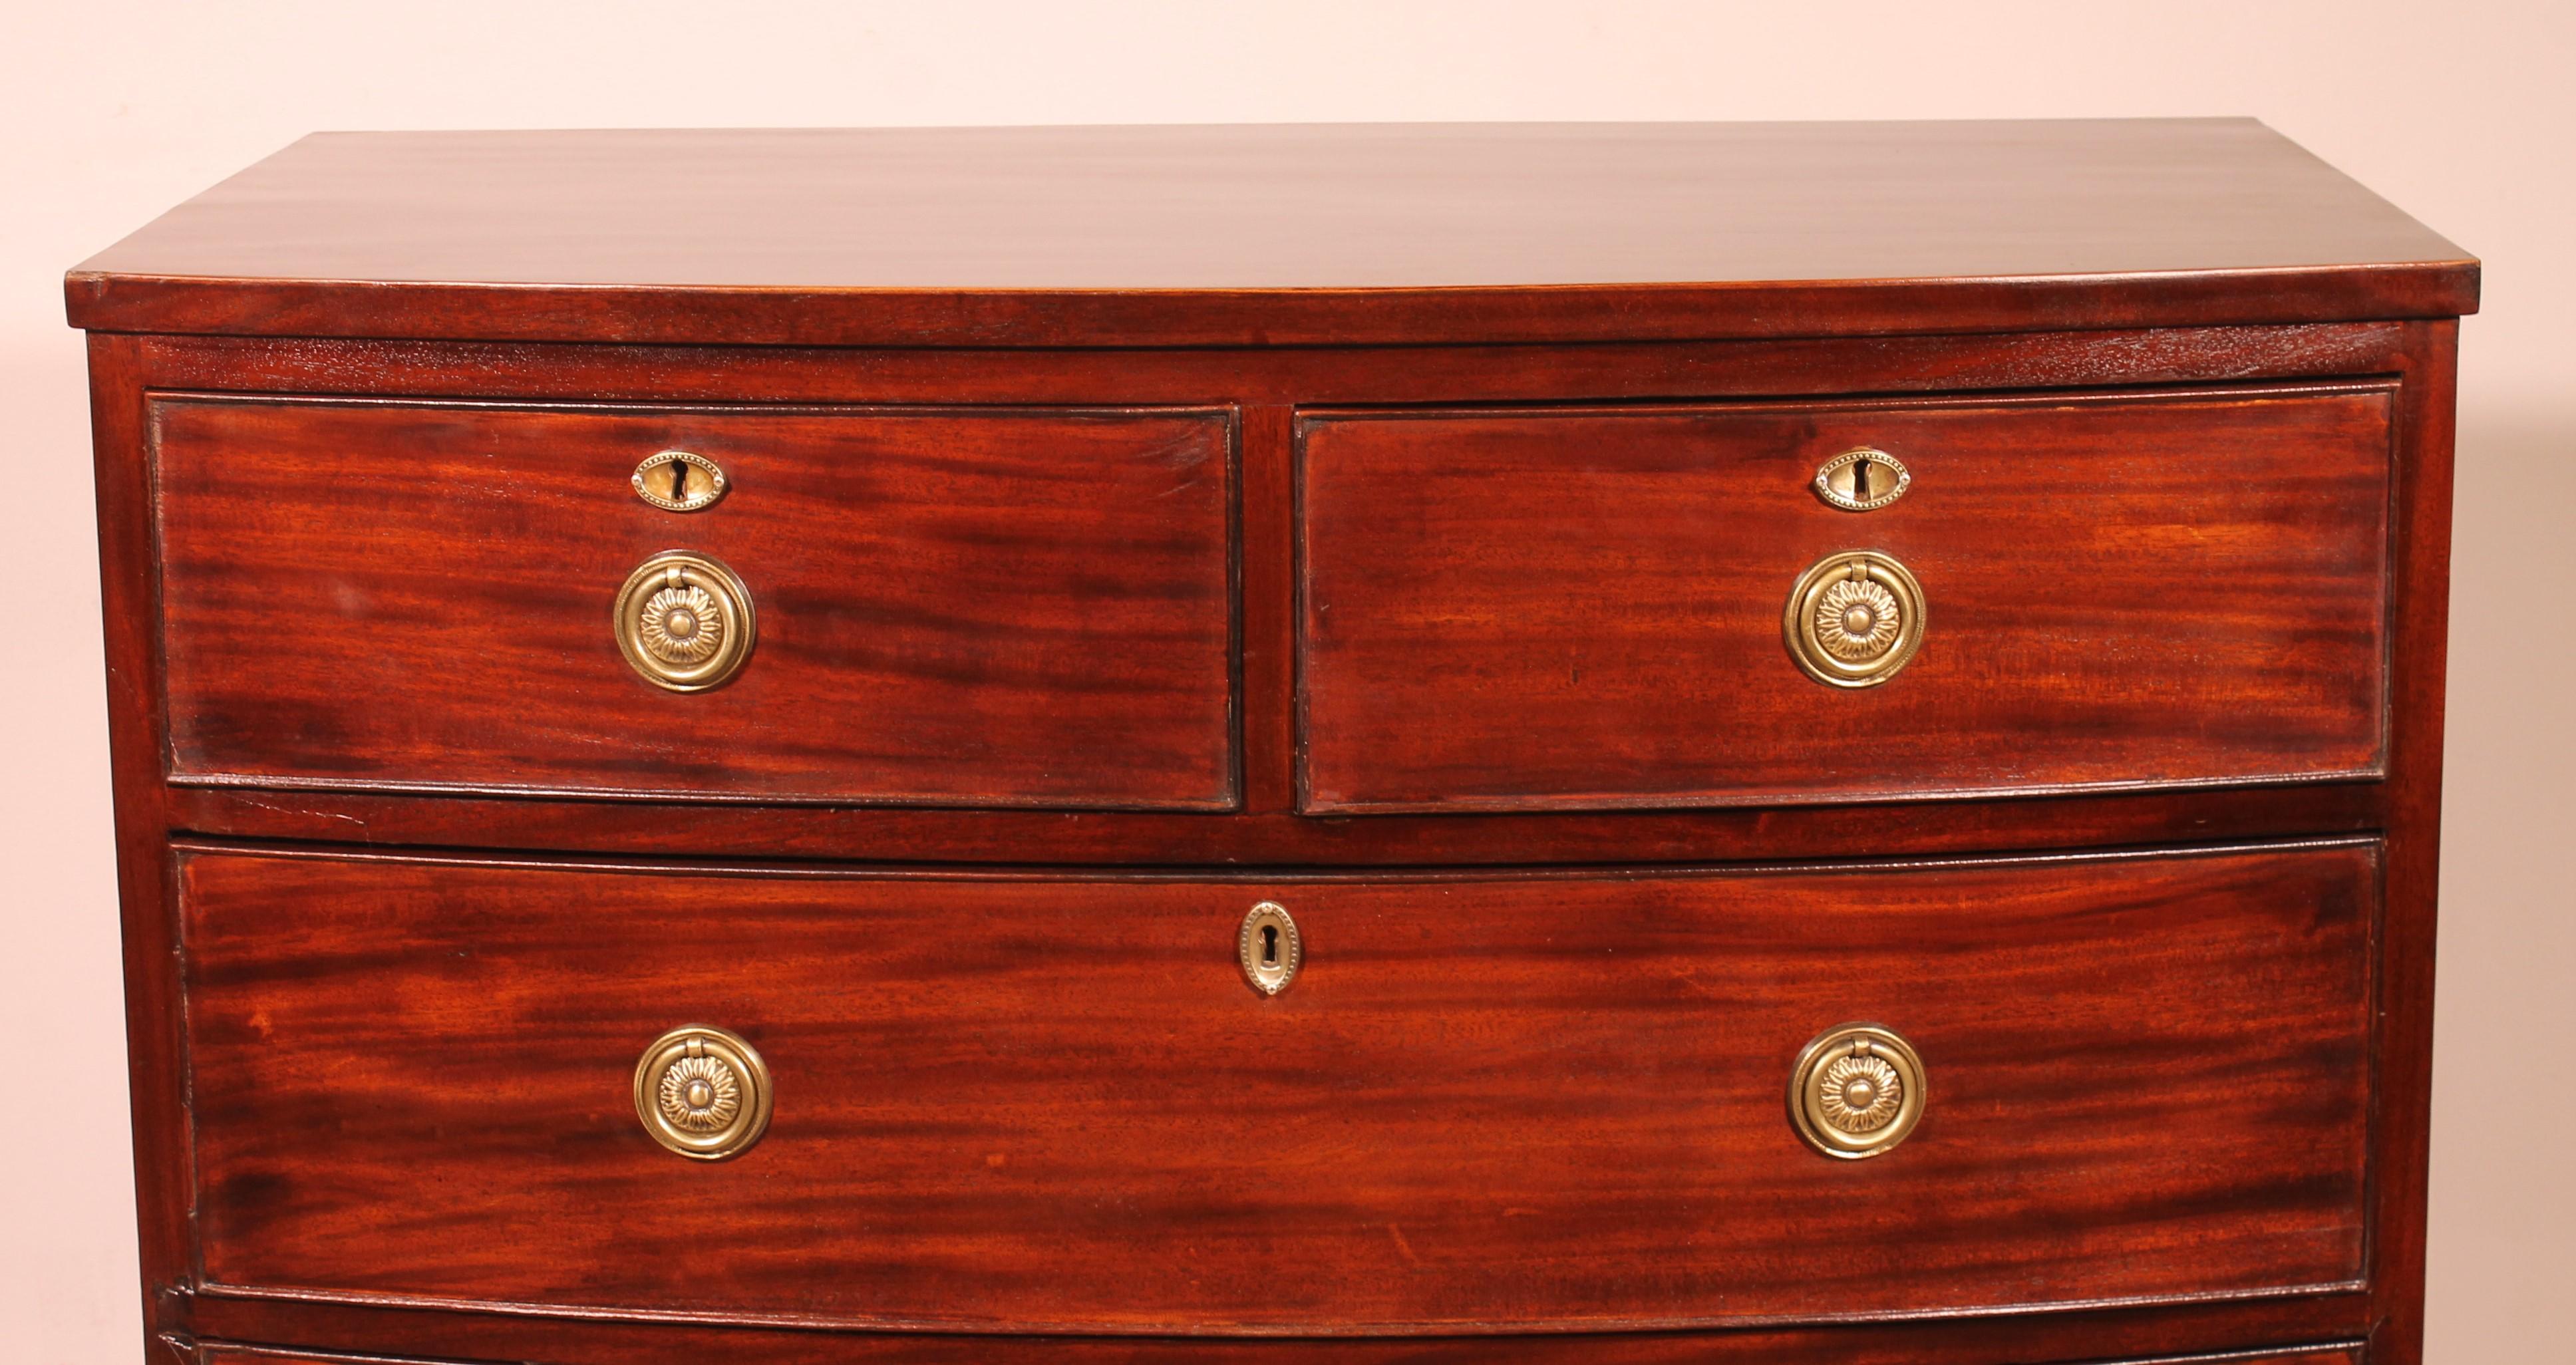 Superb bowfront mahogany chest of drawers circa 1800 from England

chest which has the front as well as drawers curved

small chest of drawers with a discreet marquetry inlay at the bottom as well as a lemon inlay fillet on the edge of the